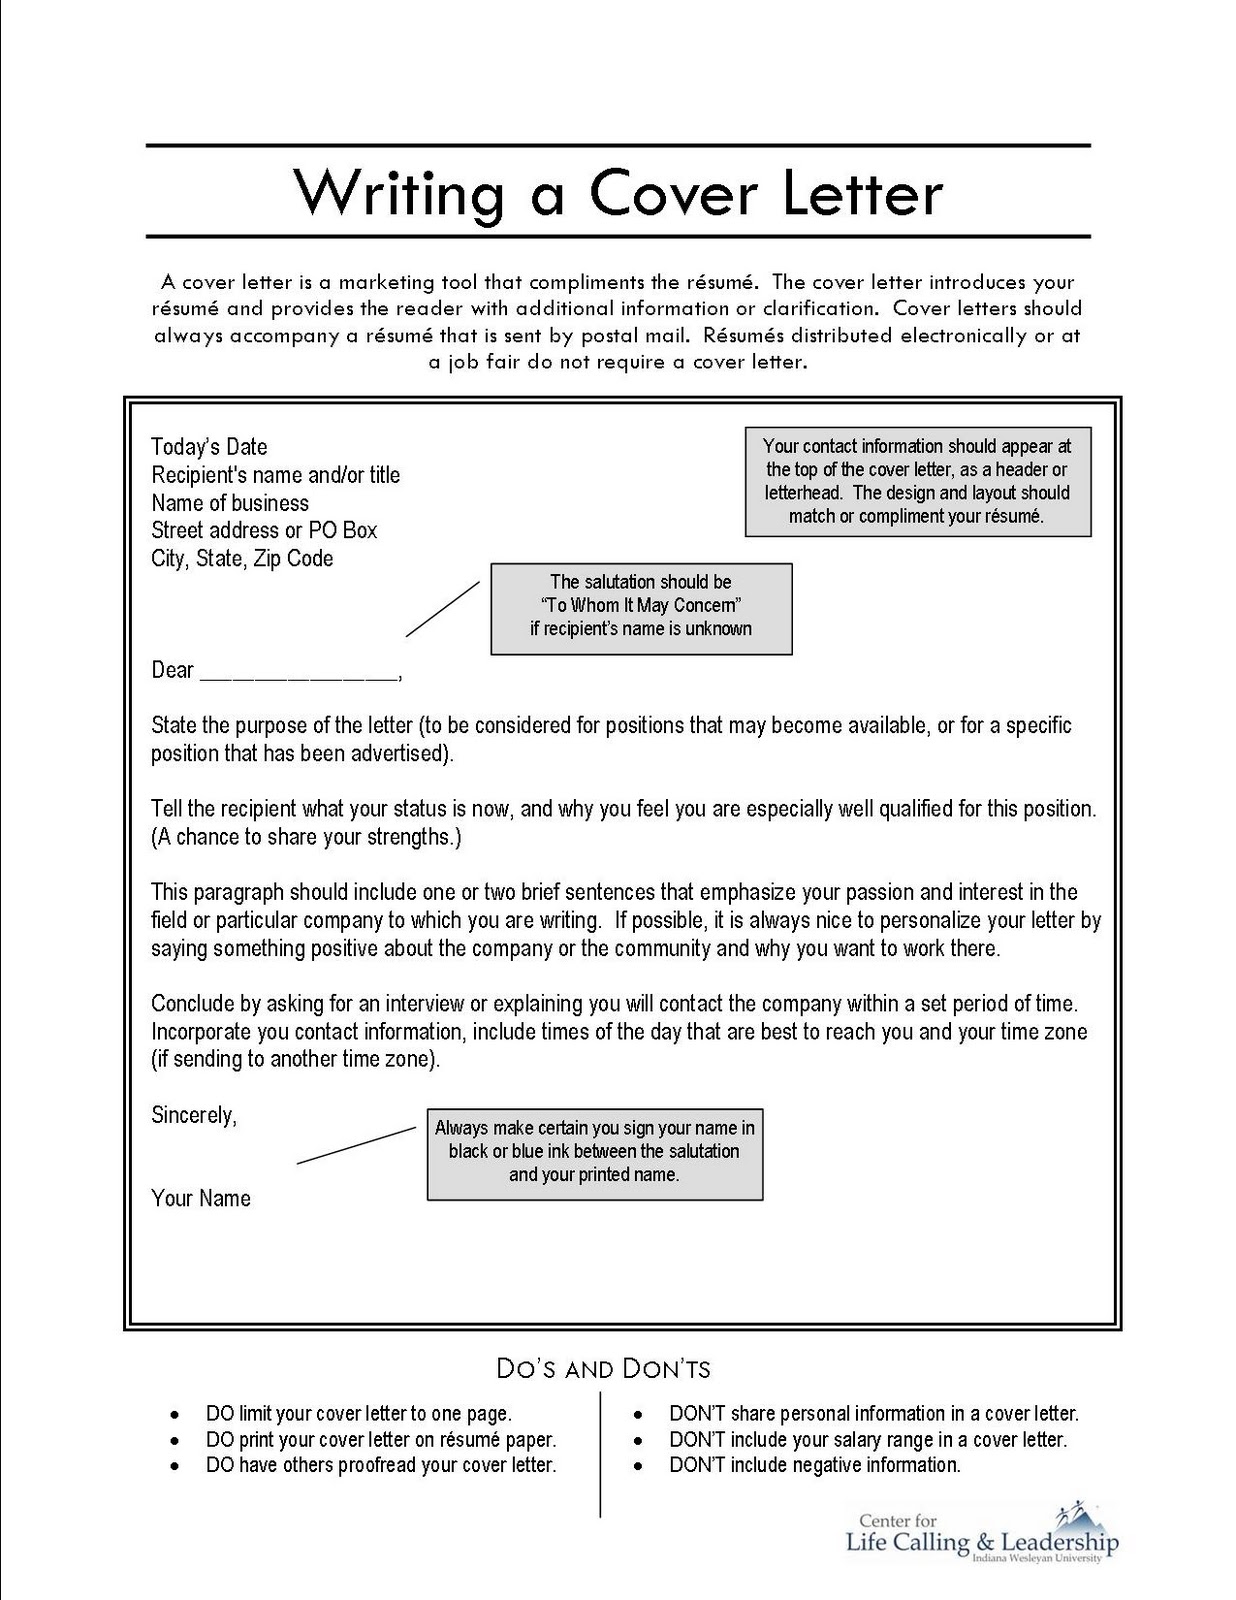 What should you say in a cover letter for a job